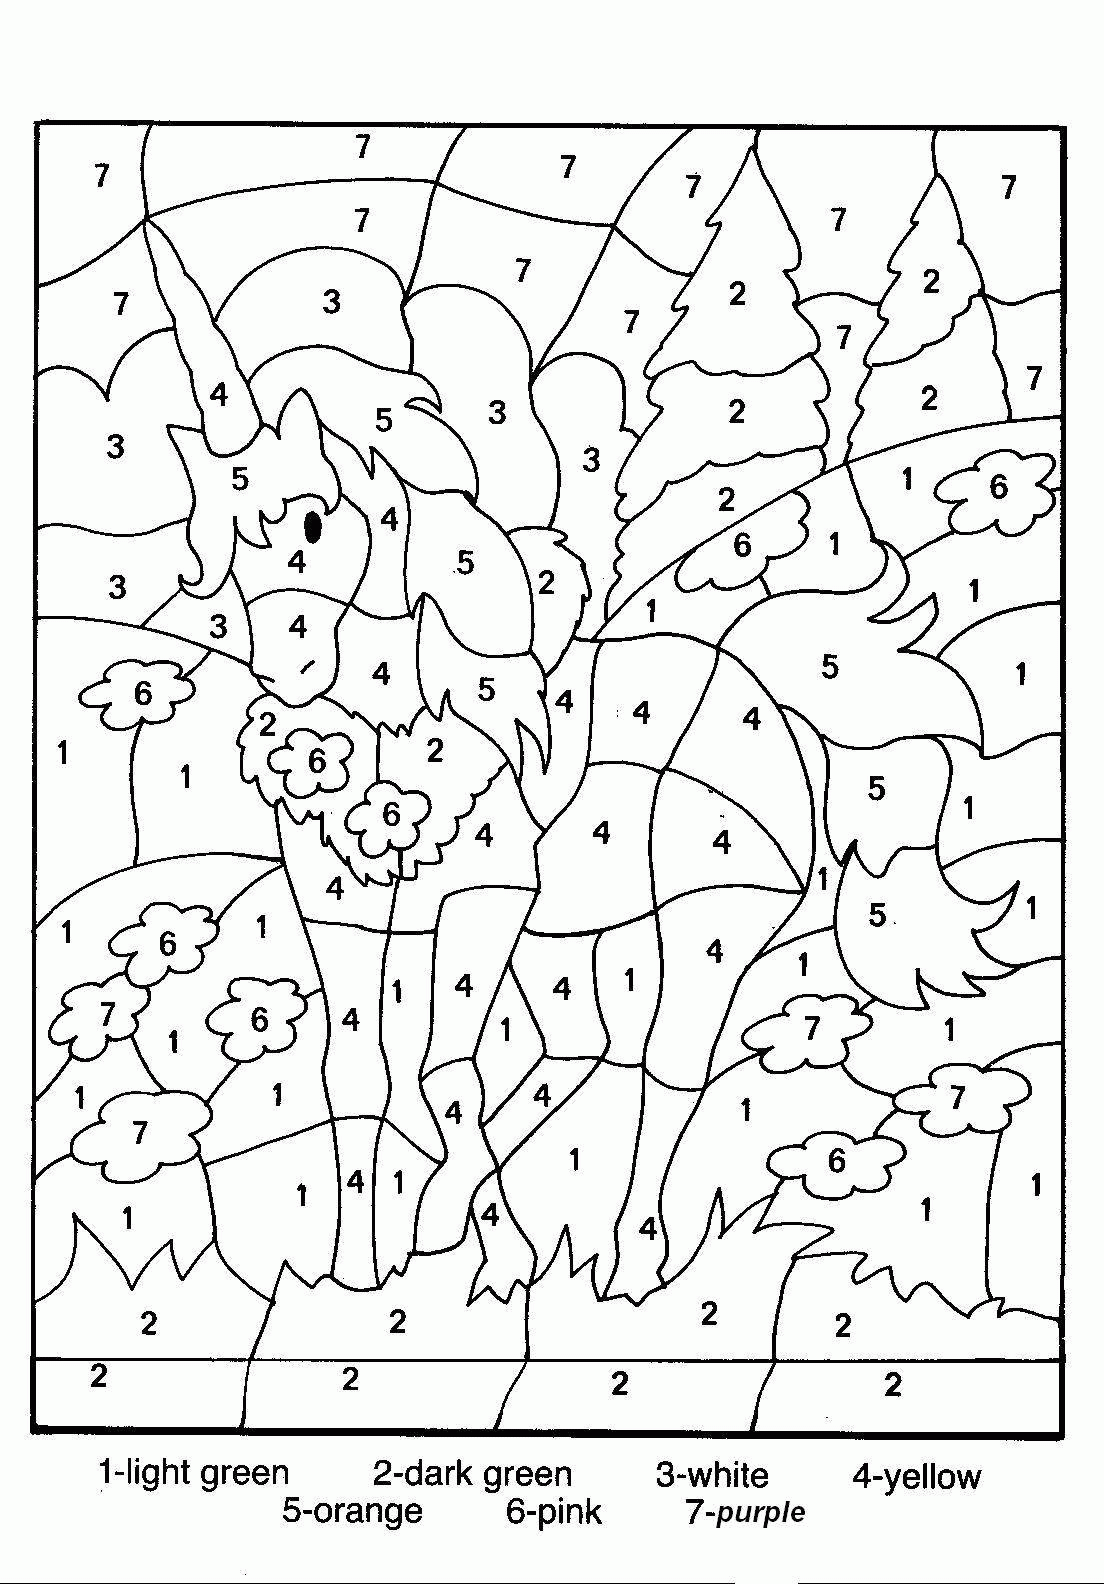 Coloring Pages By Number For Adults   Coloring Home